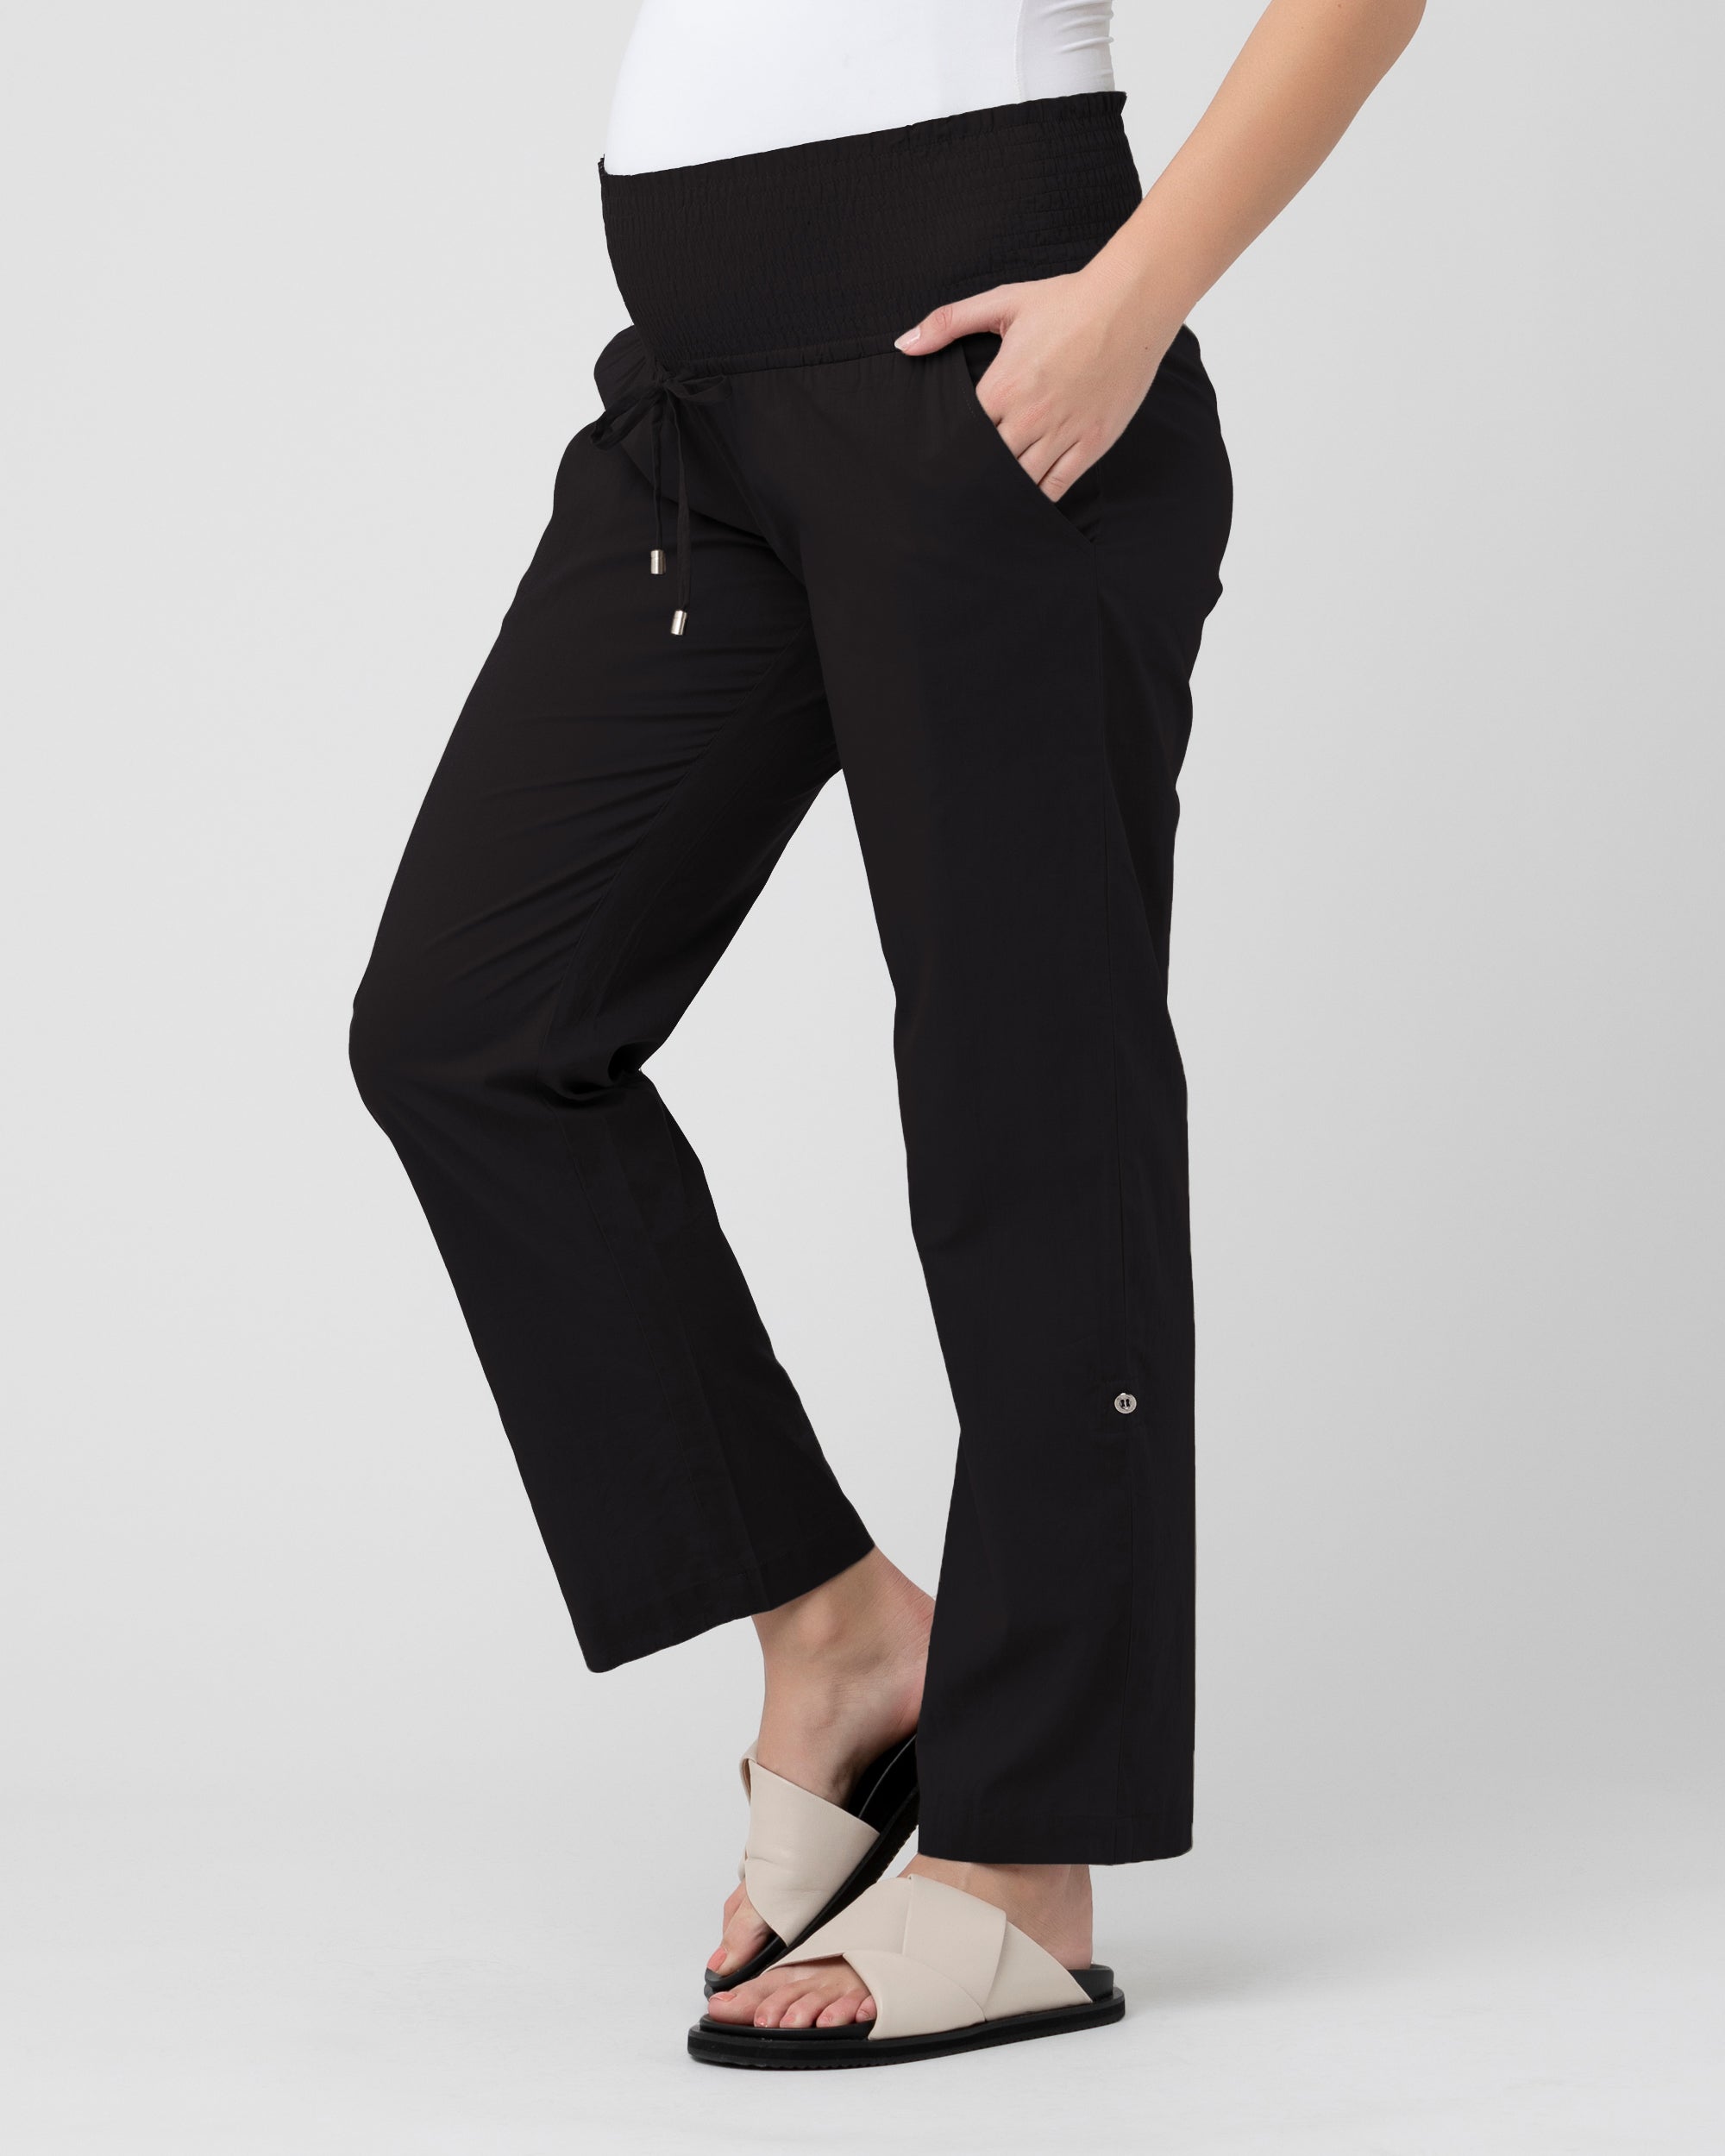 Philly Cotton Pant Black